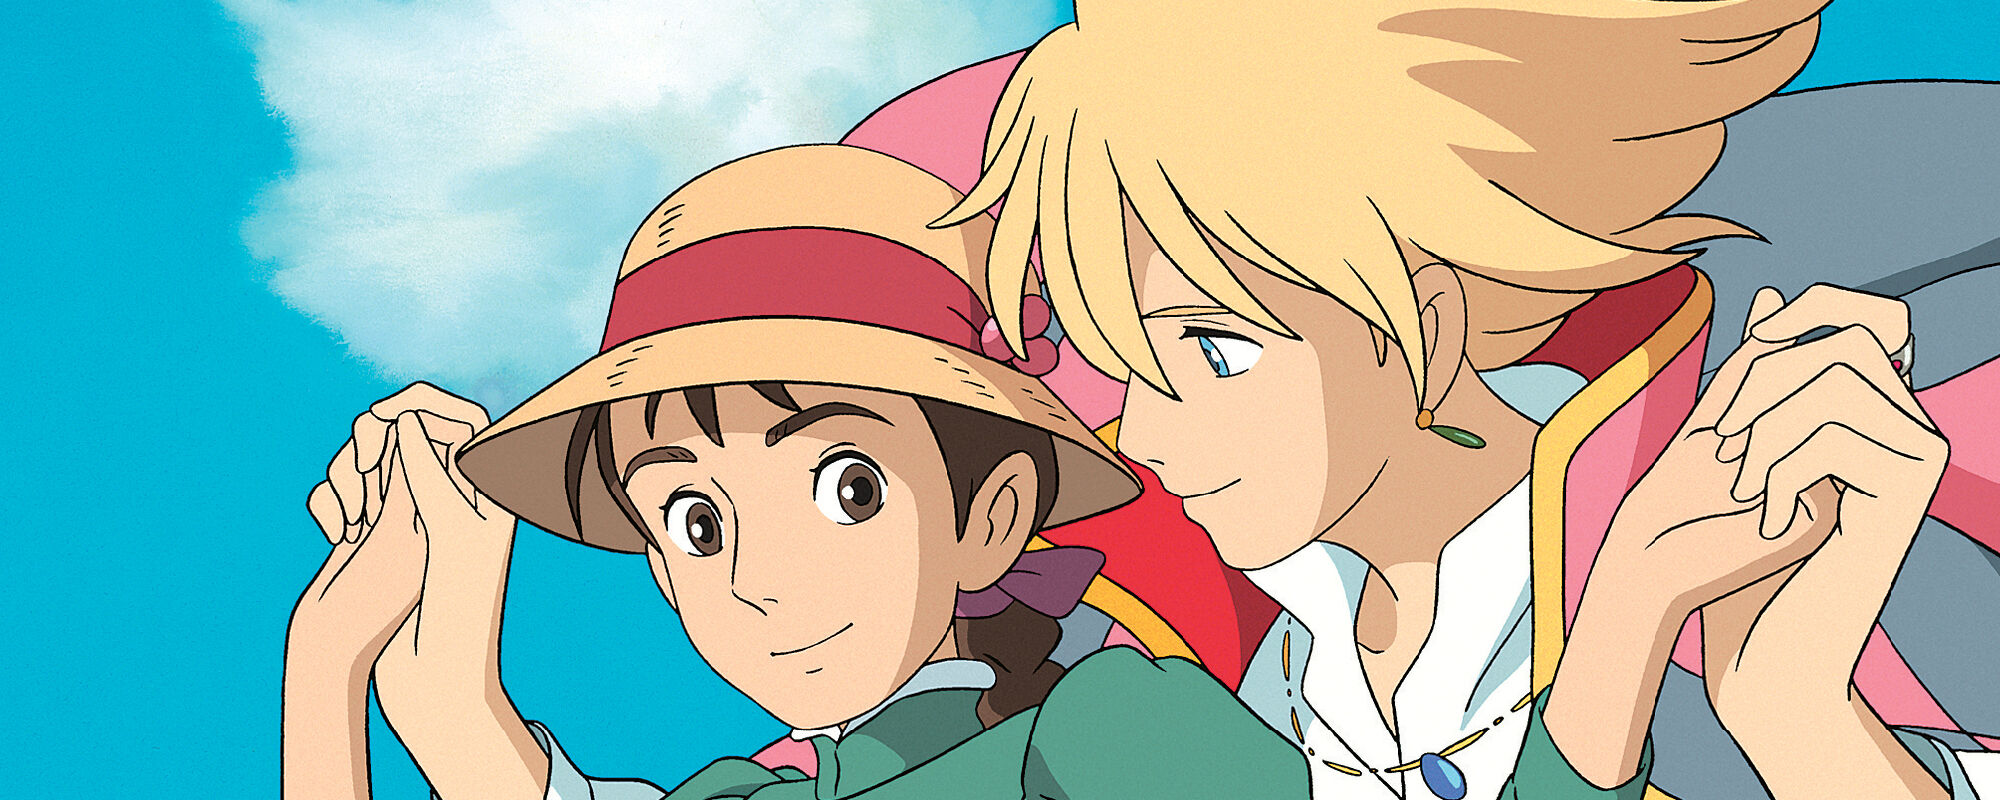 The Magical & Nostalgic Feel of Howl's Moving Castle - Emertainment Monthly